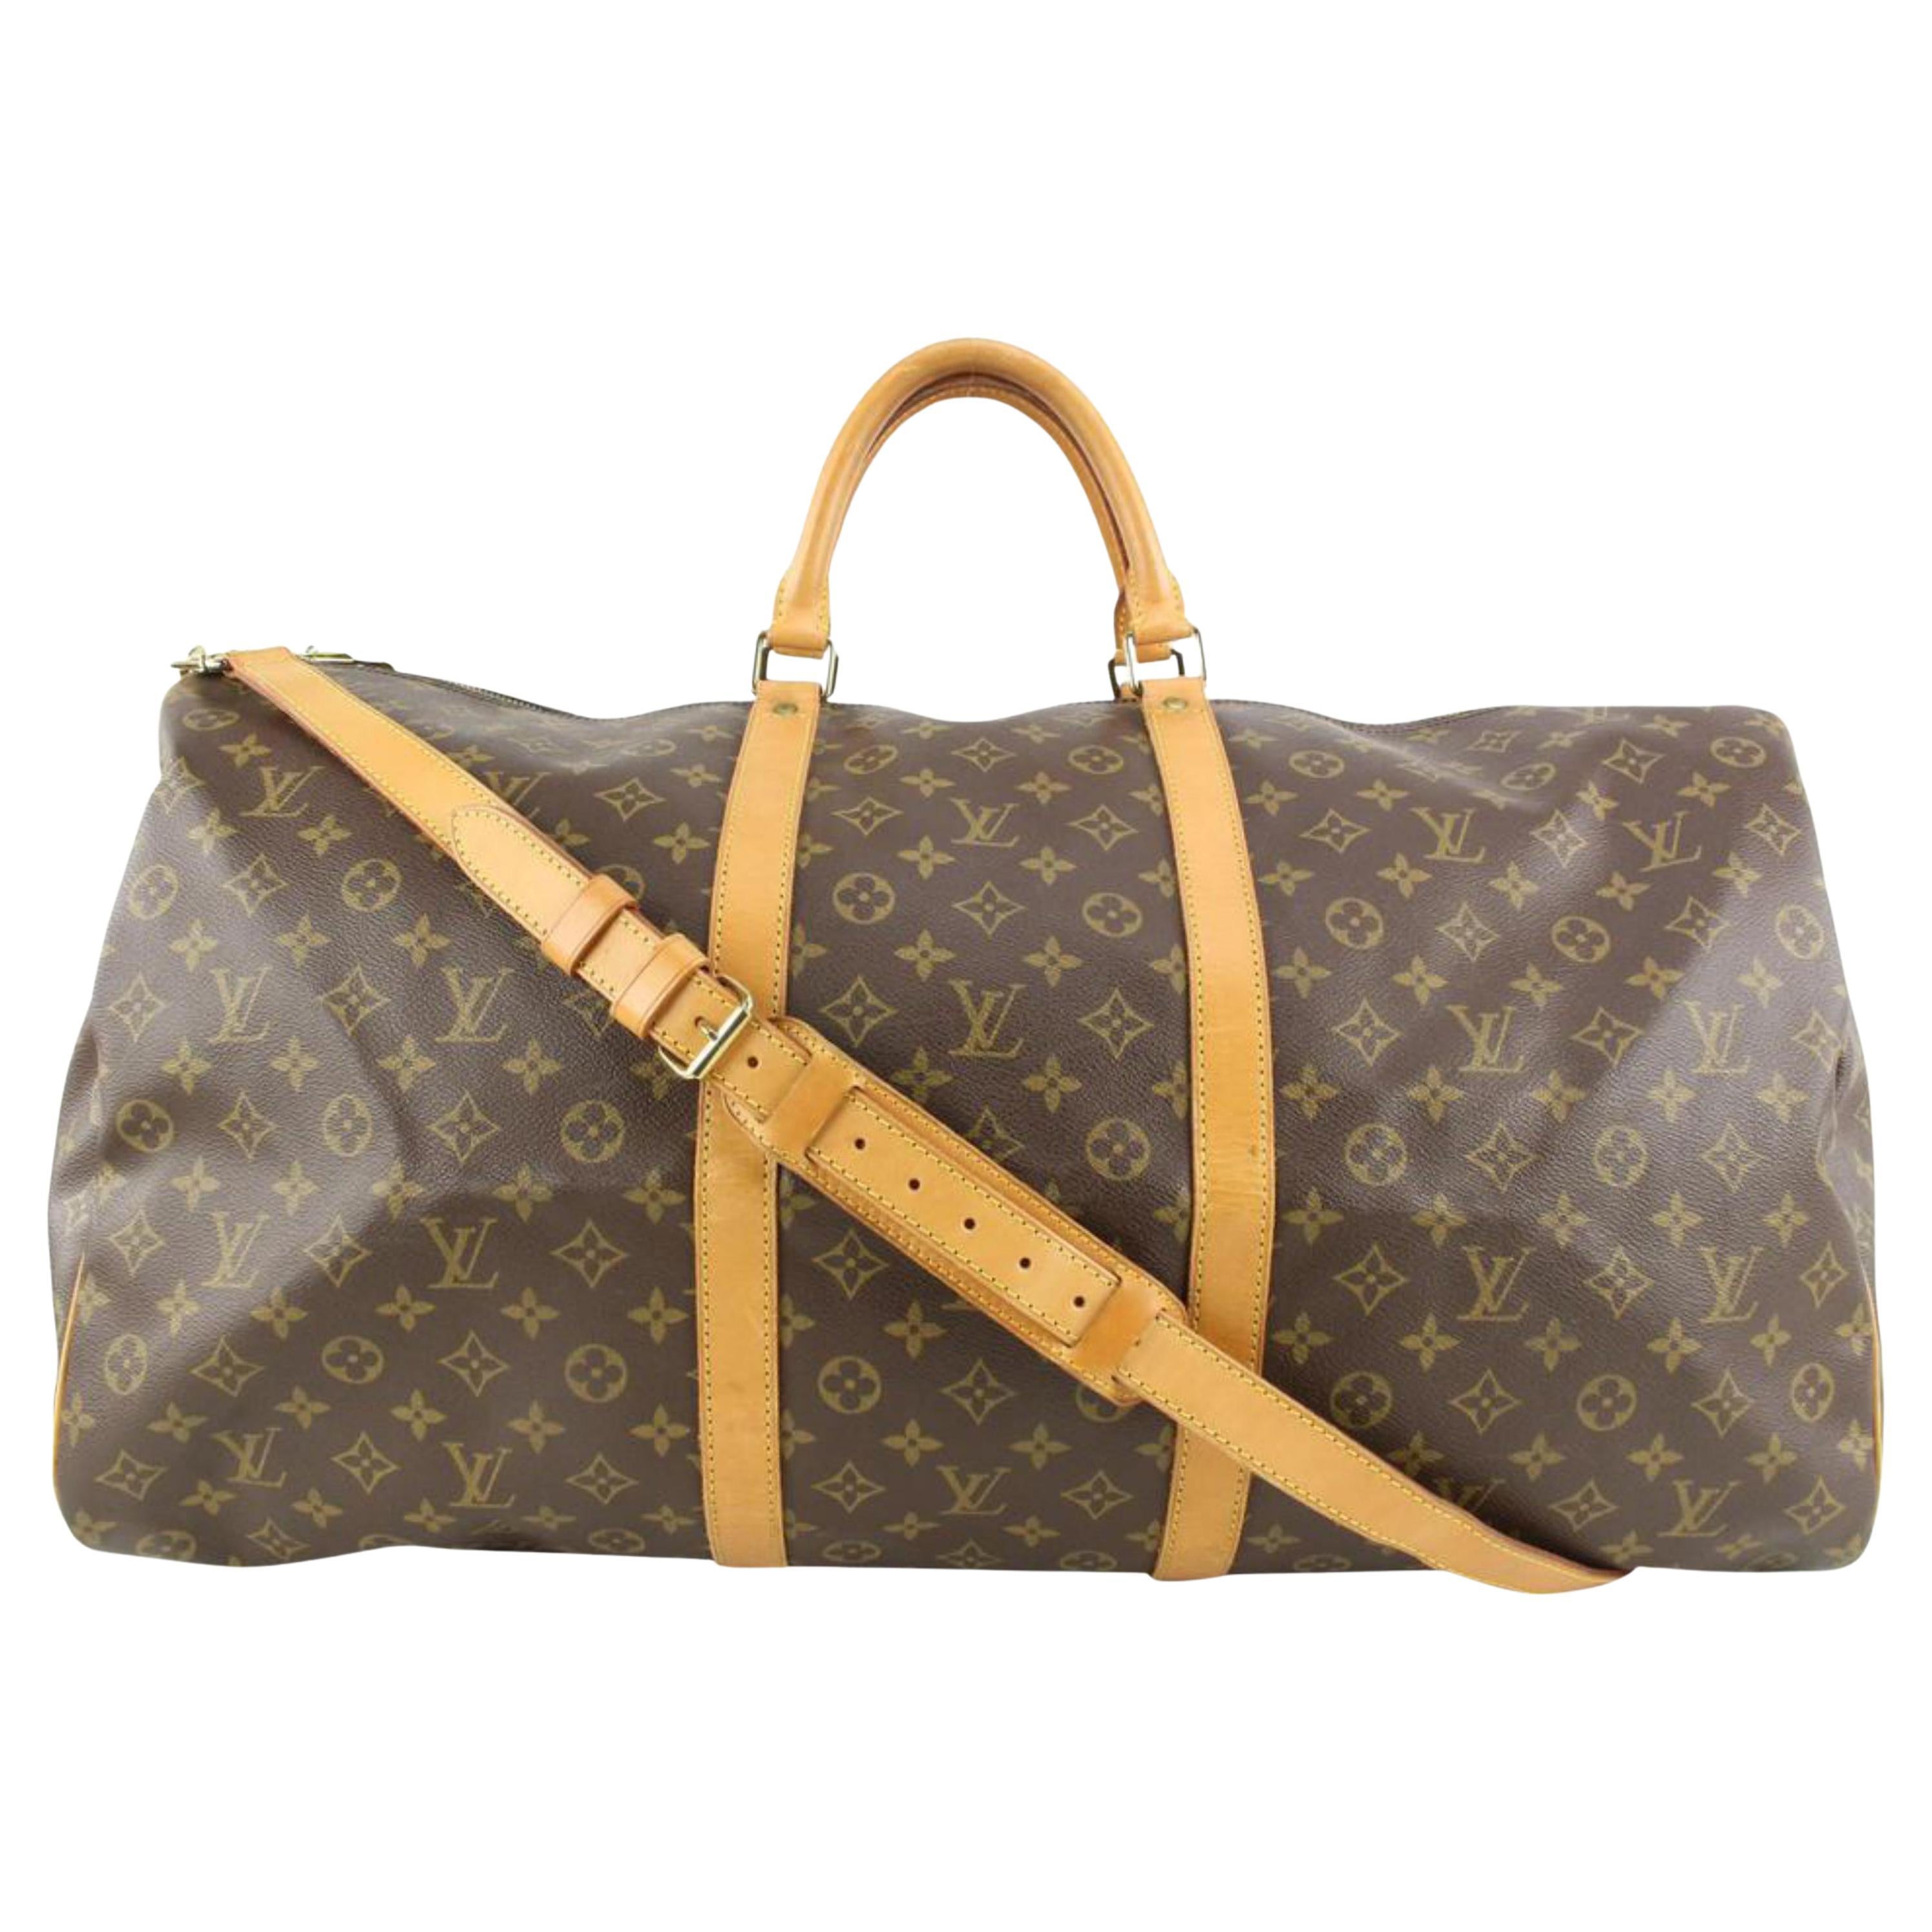 Louis Vuitton Large Monogram Keepall Bandouliere 60 Duffle with Strap 110lv55 For Sale